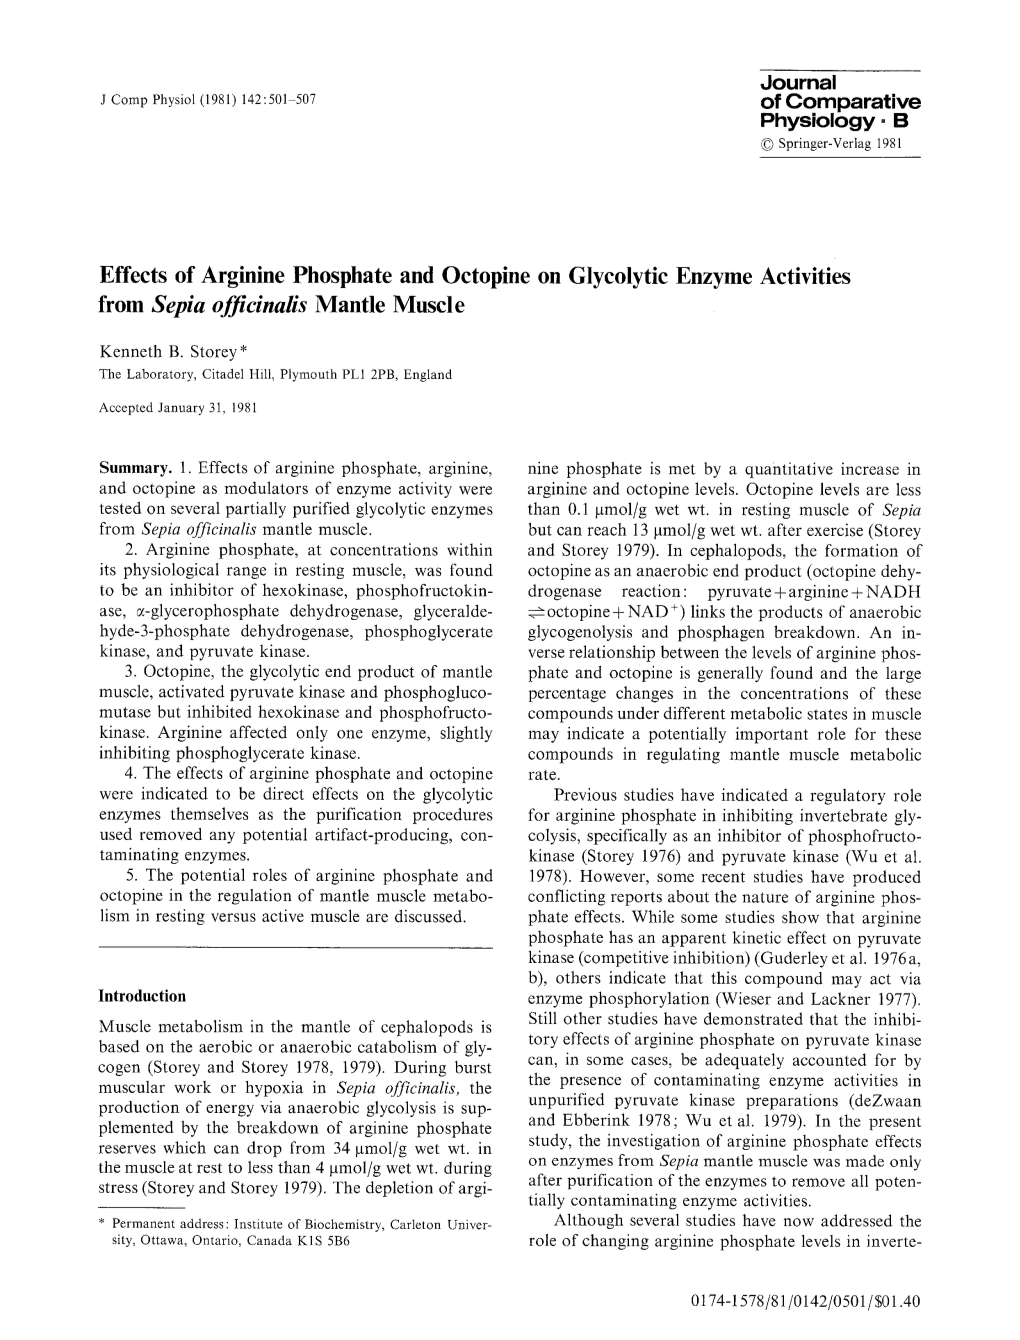 Effects of Arginine Phosphate and Octopine on Glycolytic Enzyme Activities from Sepia Officinalis Mantle Muscle